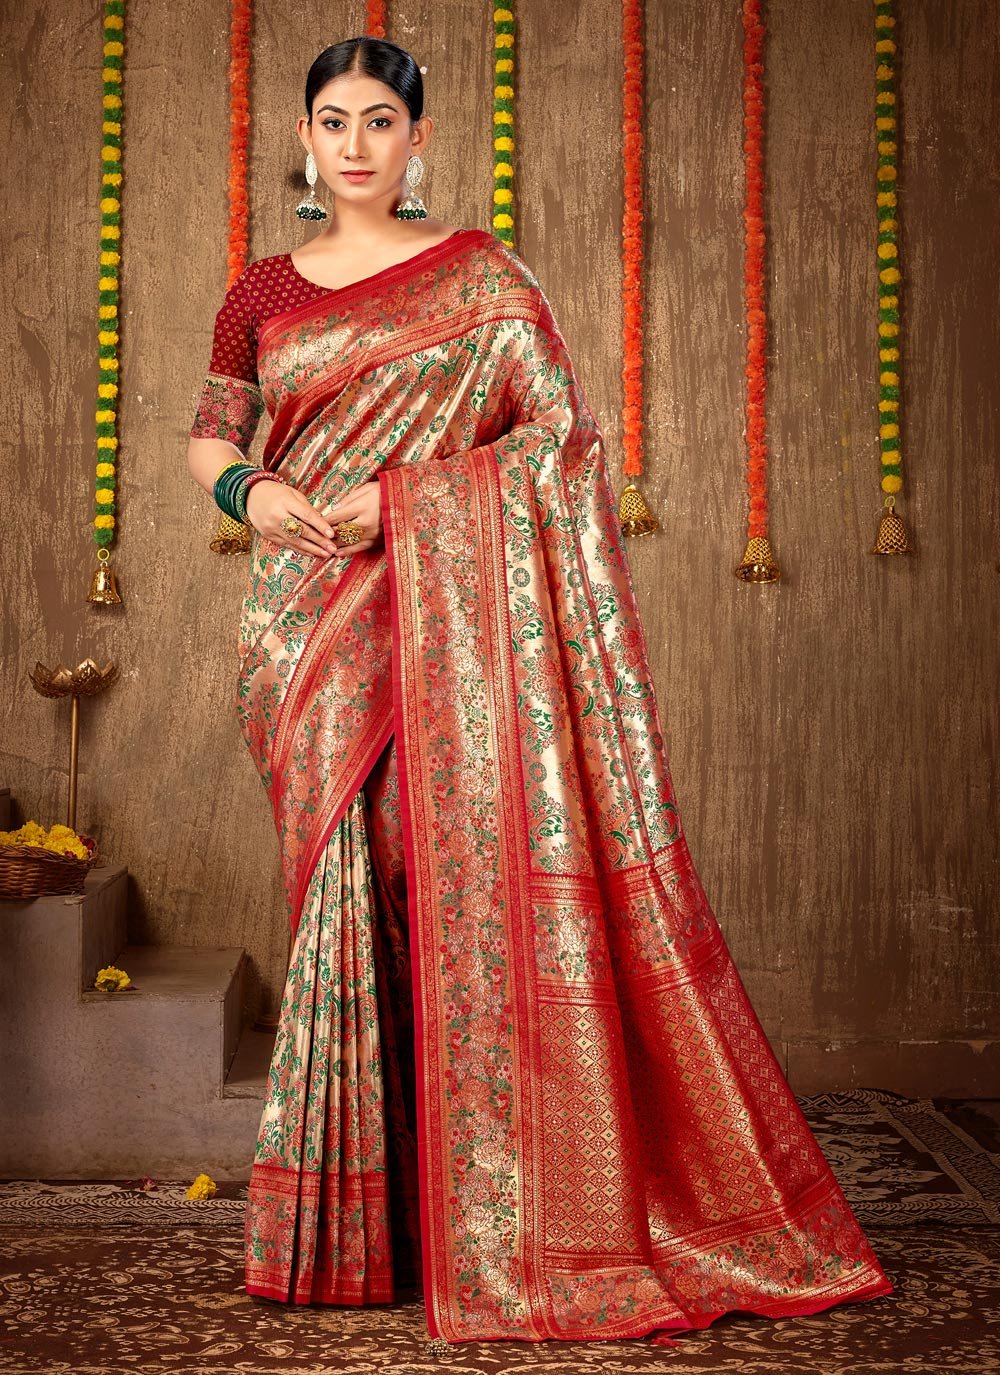 Buy Fortune2222 Banarsi Maharani Silk Saree For Wedding Festivals Display  Royal Aura (RED) Package Content Saree With Blouse Piece at Amazon.in